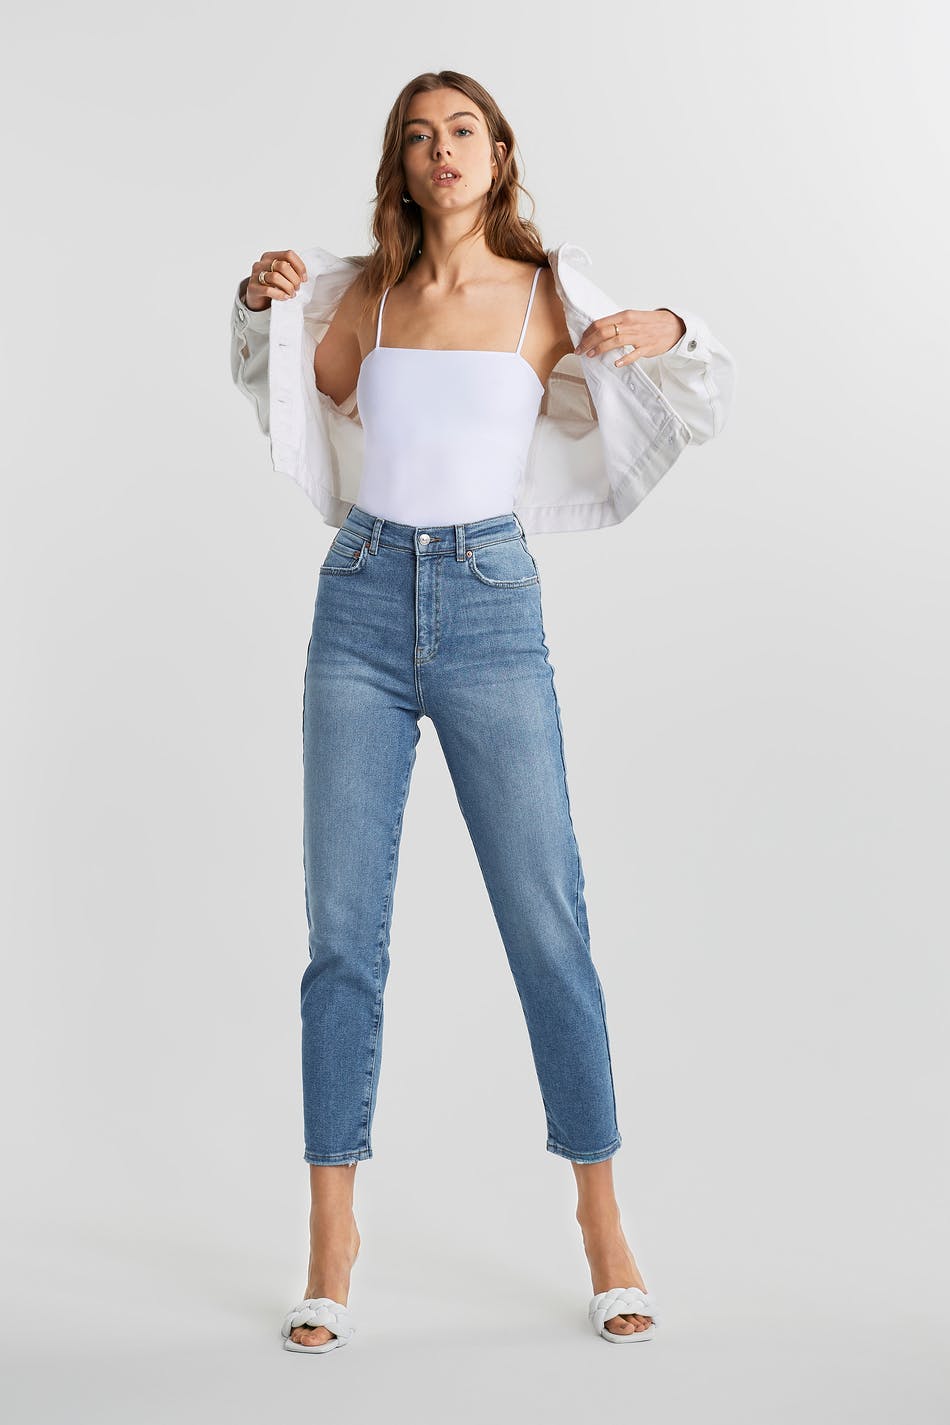 comfy mom jeans